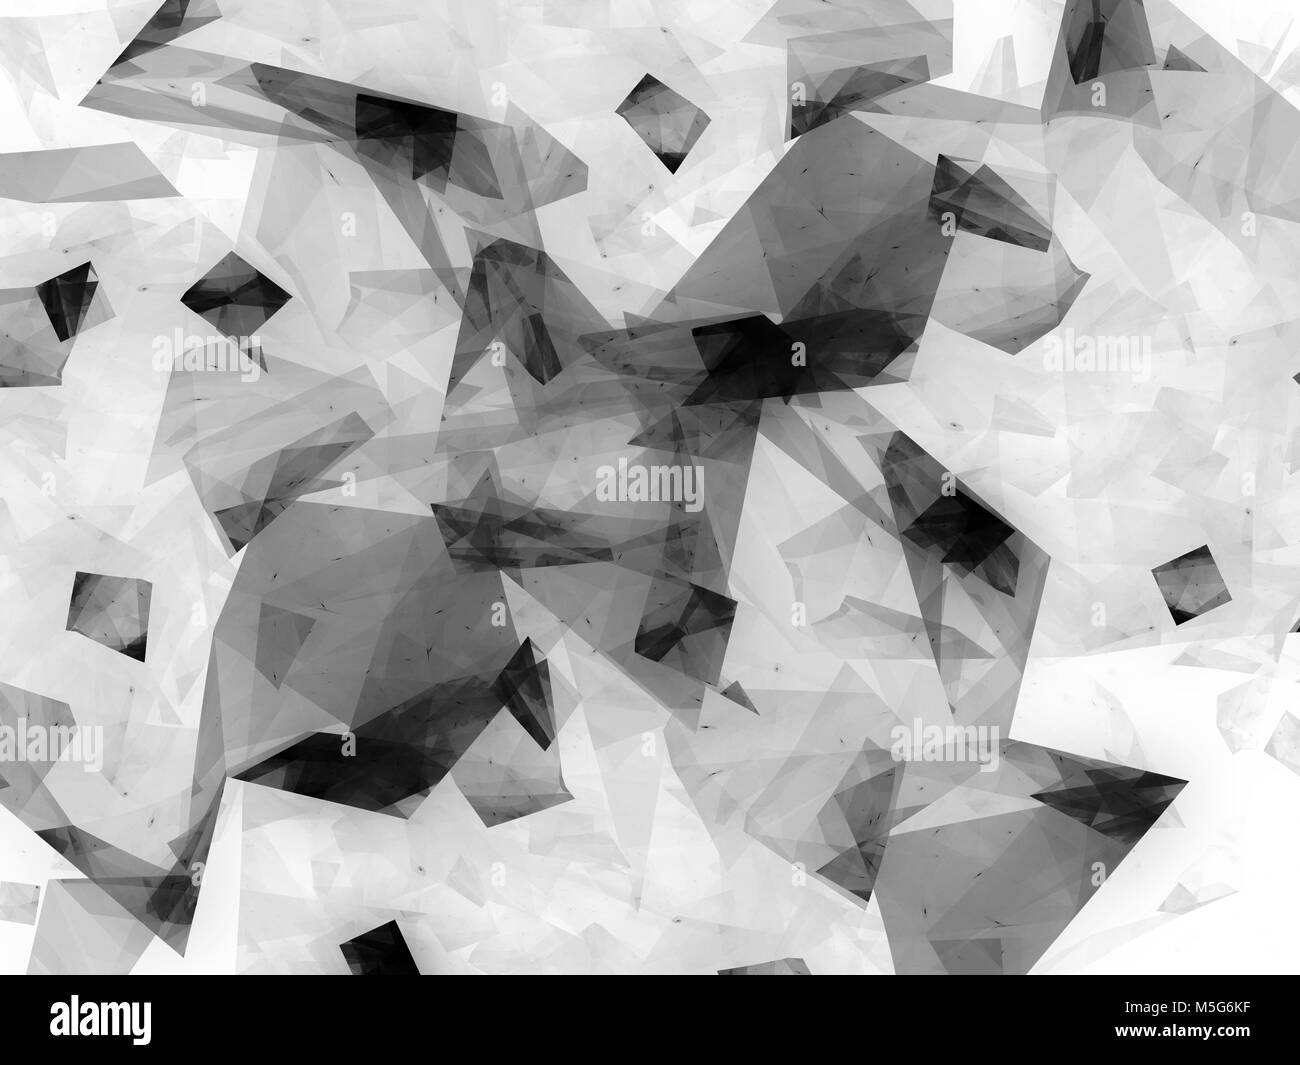 Glowing low poly geometric shapes, black and white inverted, computer ...